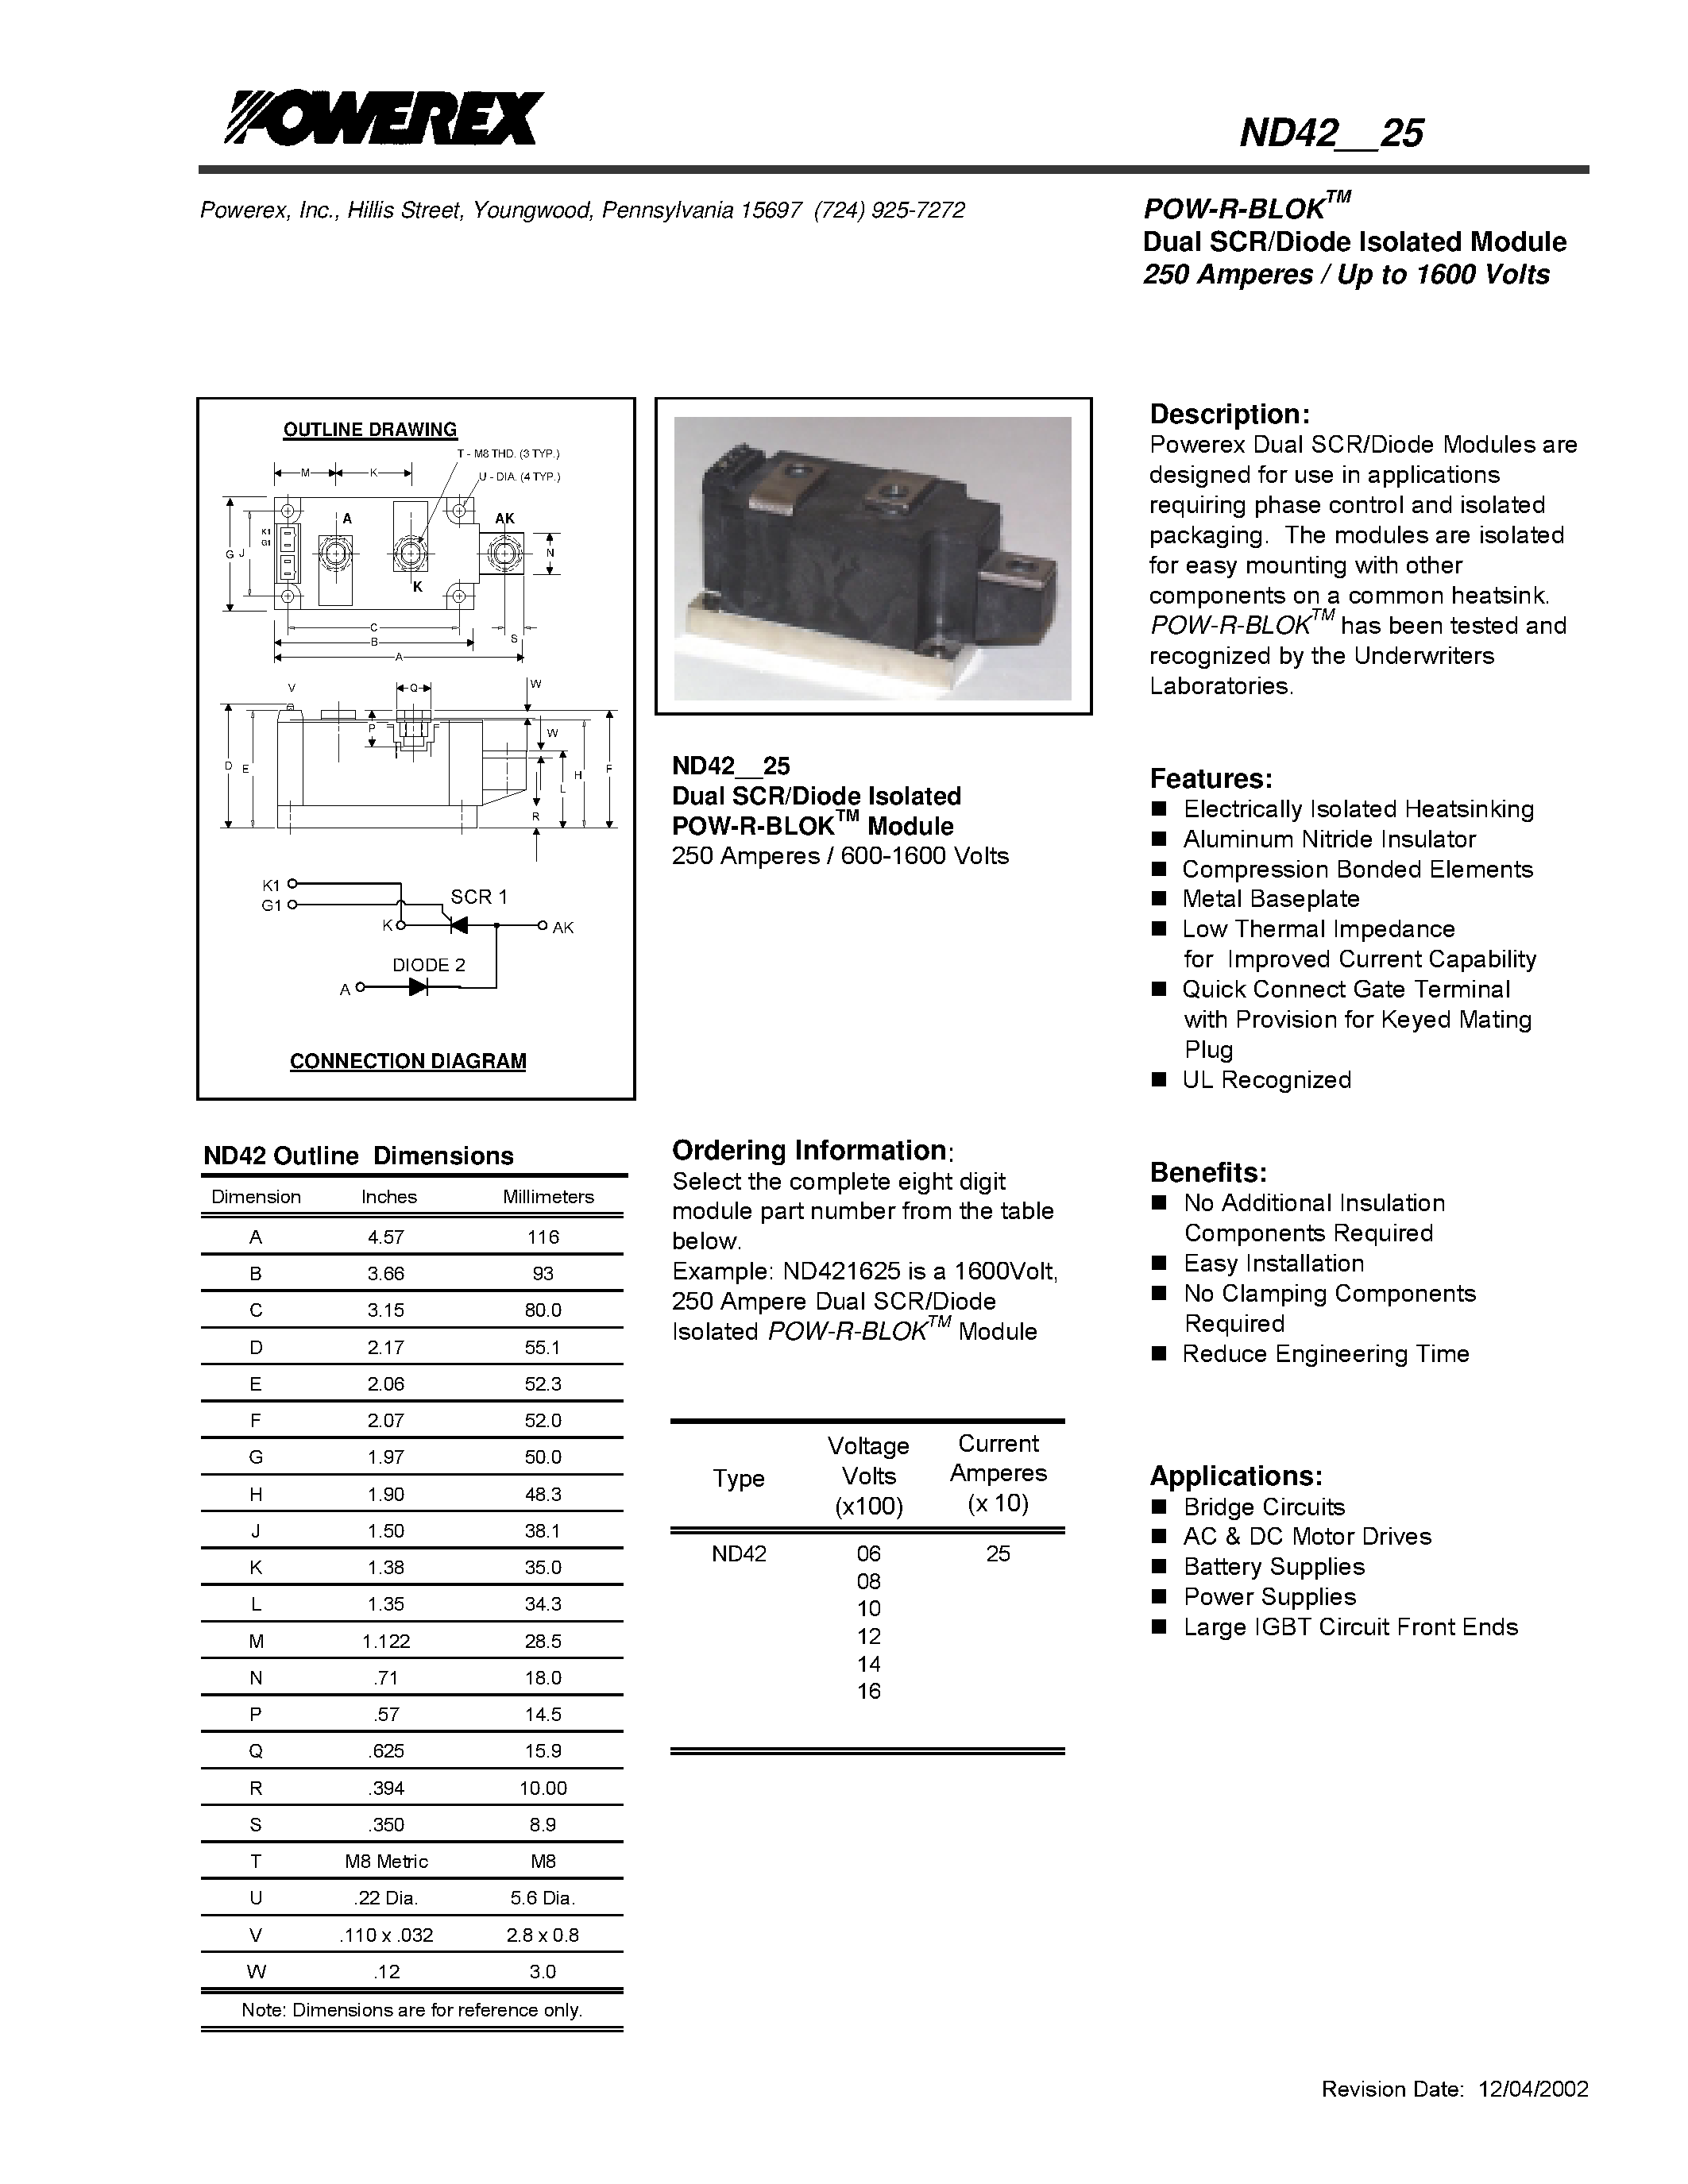 Datasheet ND421025 - POW-R-BLOK Dual SCR/Diode Isolated Module (250 Amperes / Up to 1600 Volts) page 1